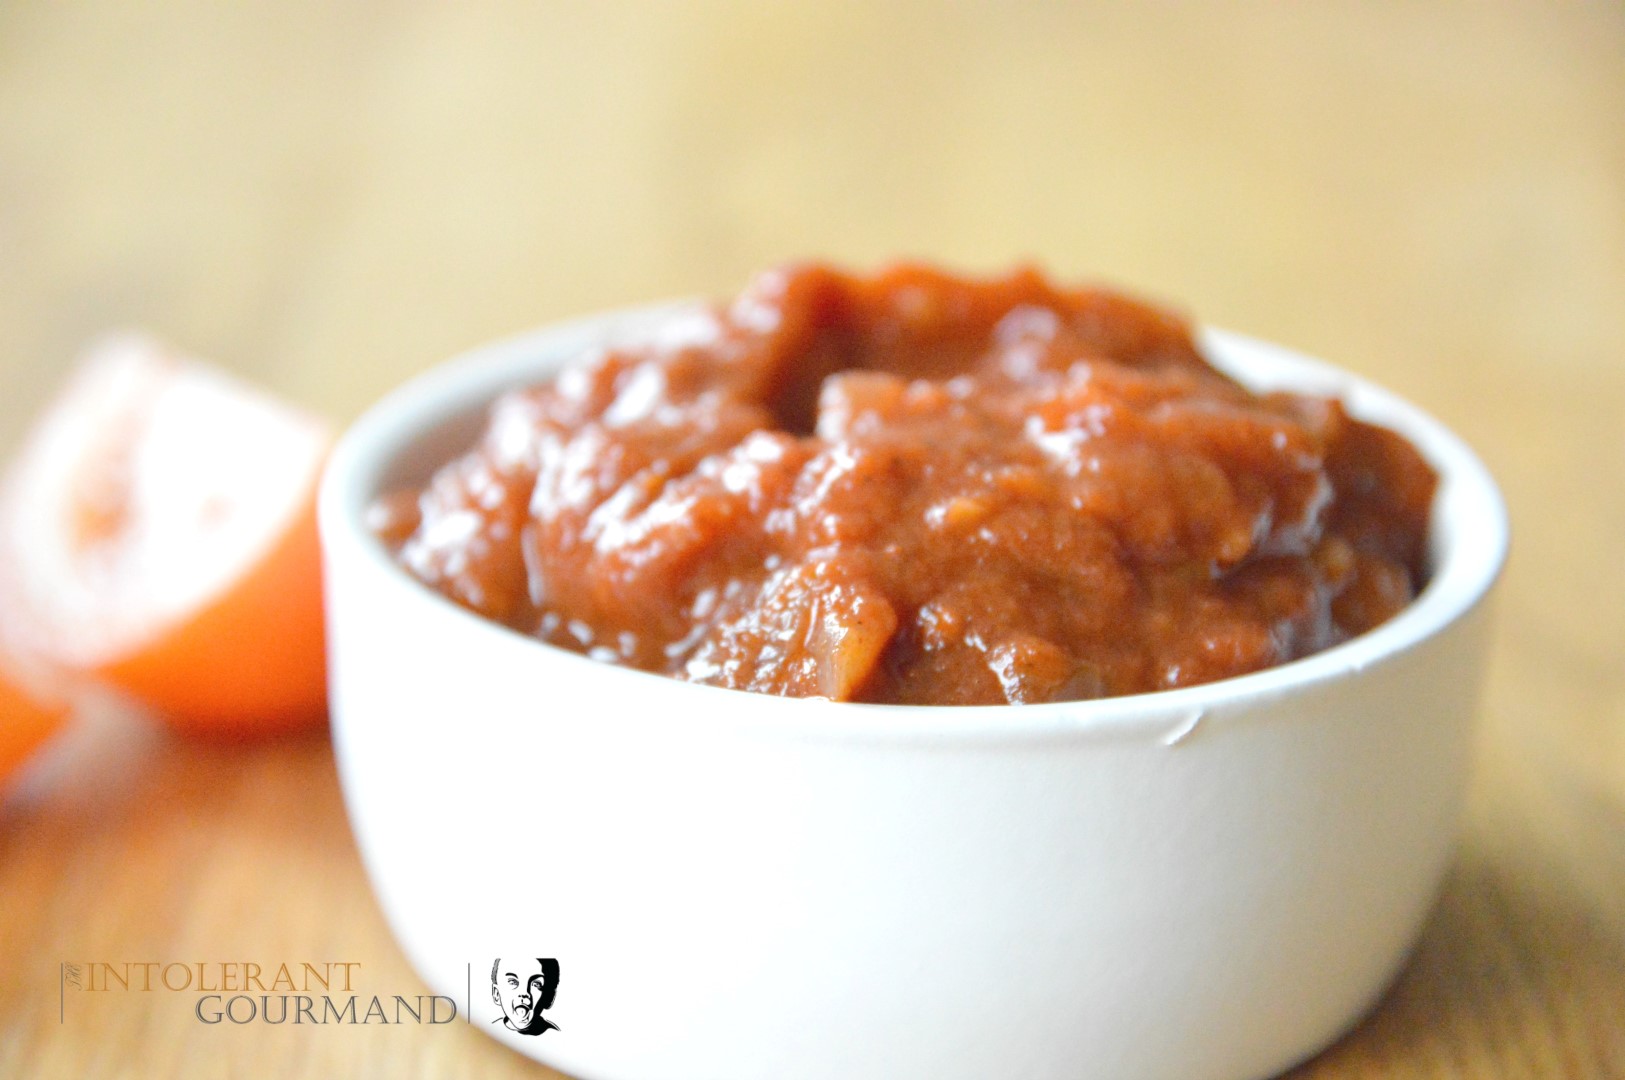 Tangy Tomato Salsa - the deliciously fresh flavours of tomato, turned into a salsa which is bursting with flavour. Naturally vegan and gluten-free! www.intolerantgourmand.com